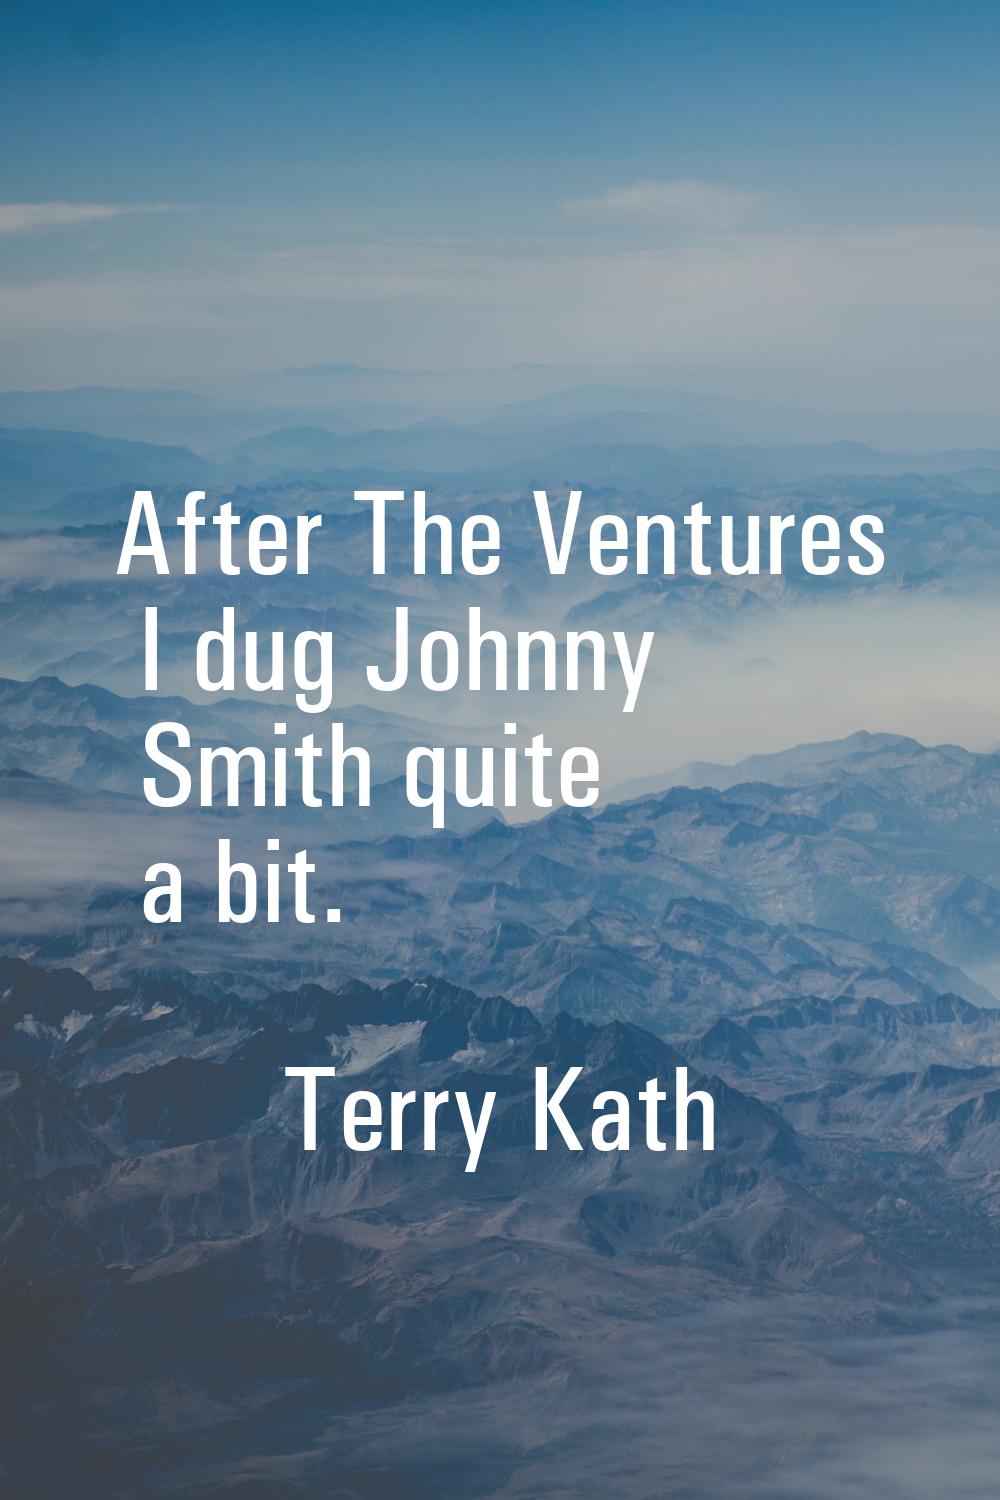 After The Ventures I dug Johnny Smith quite a bit.